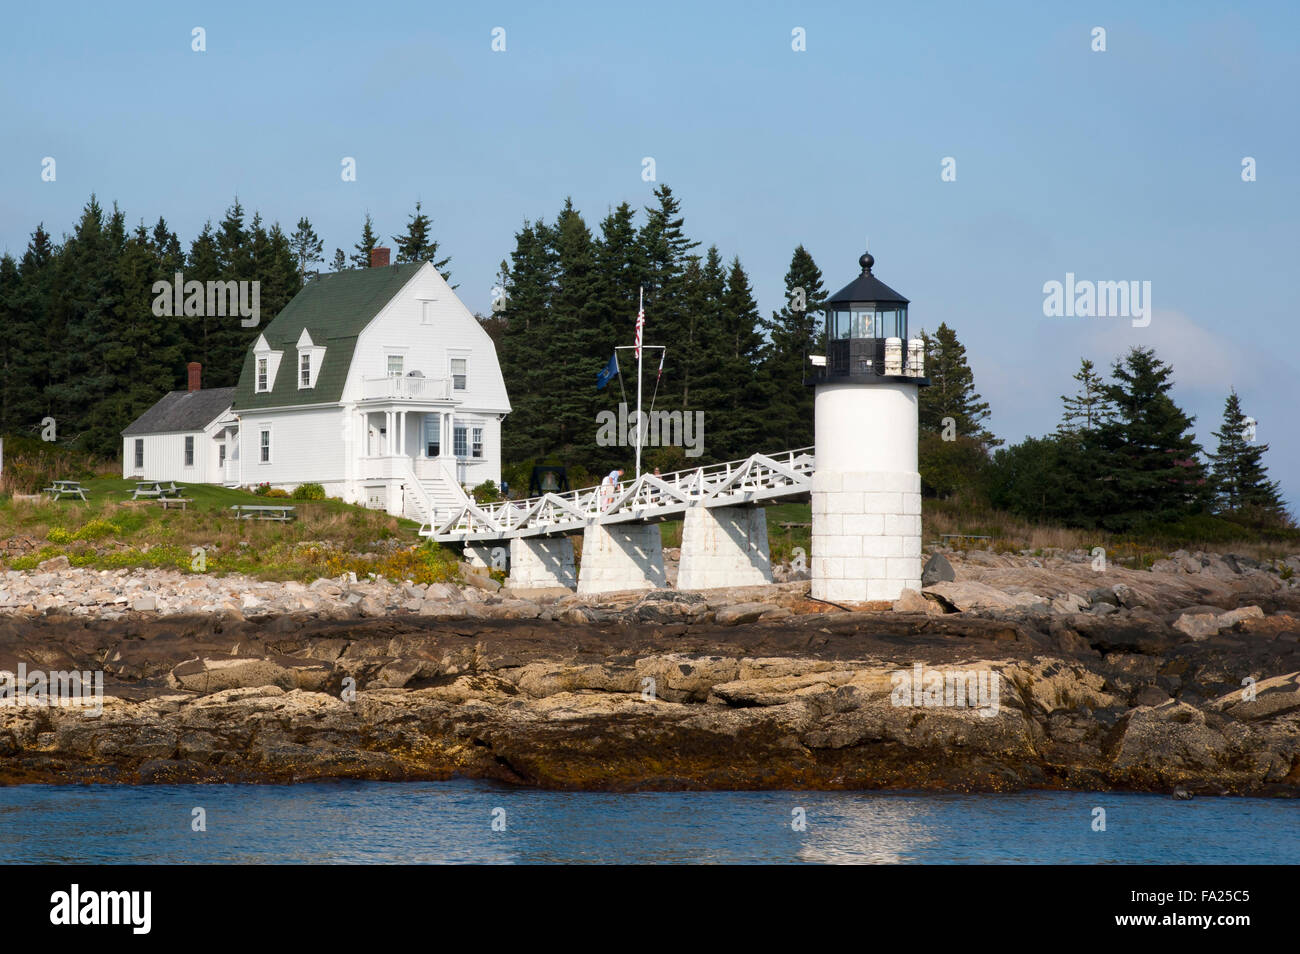 Marshall Point lighthouse on the rocky coast is a popular attraction in Port Clyde, Maine. Stock Photo